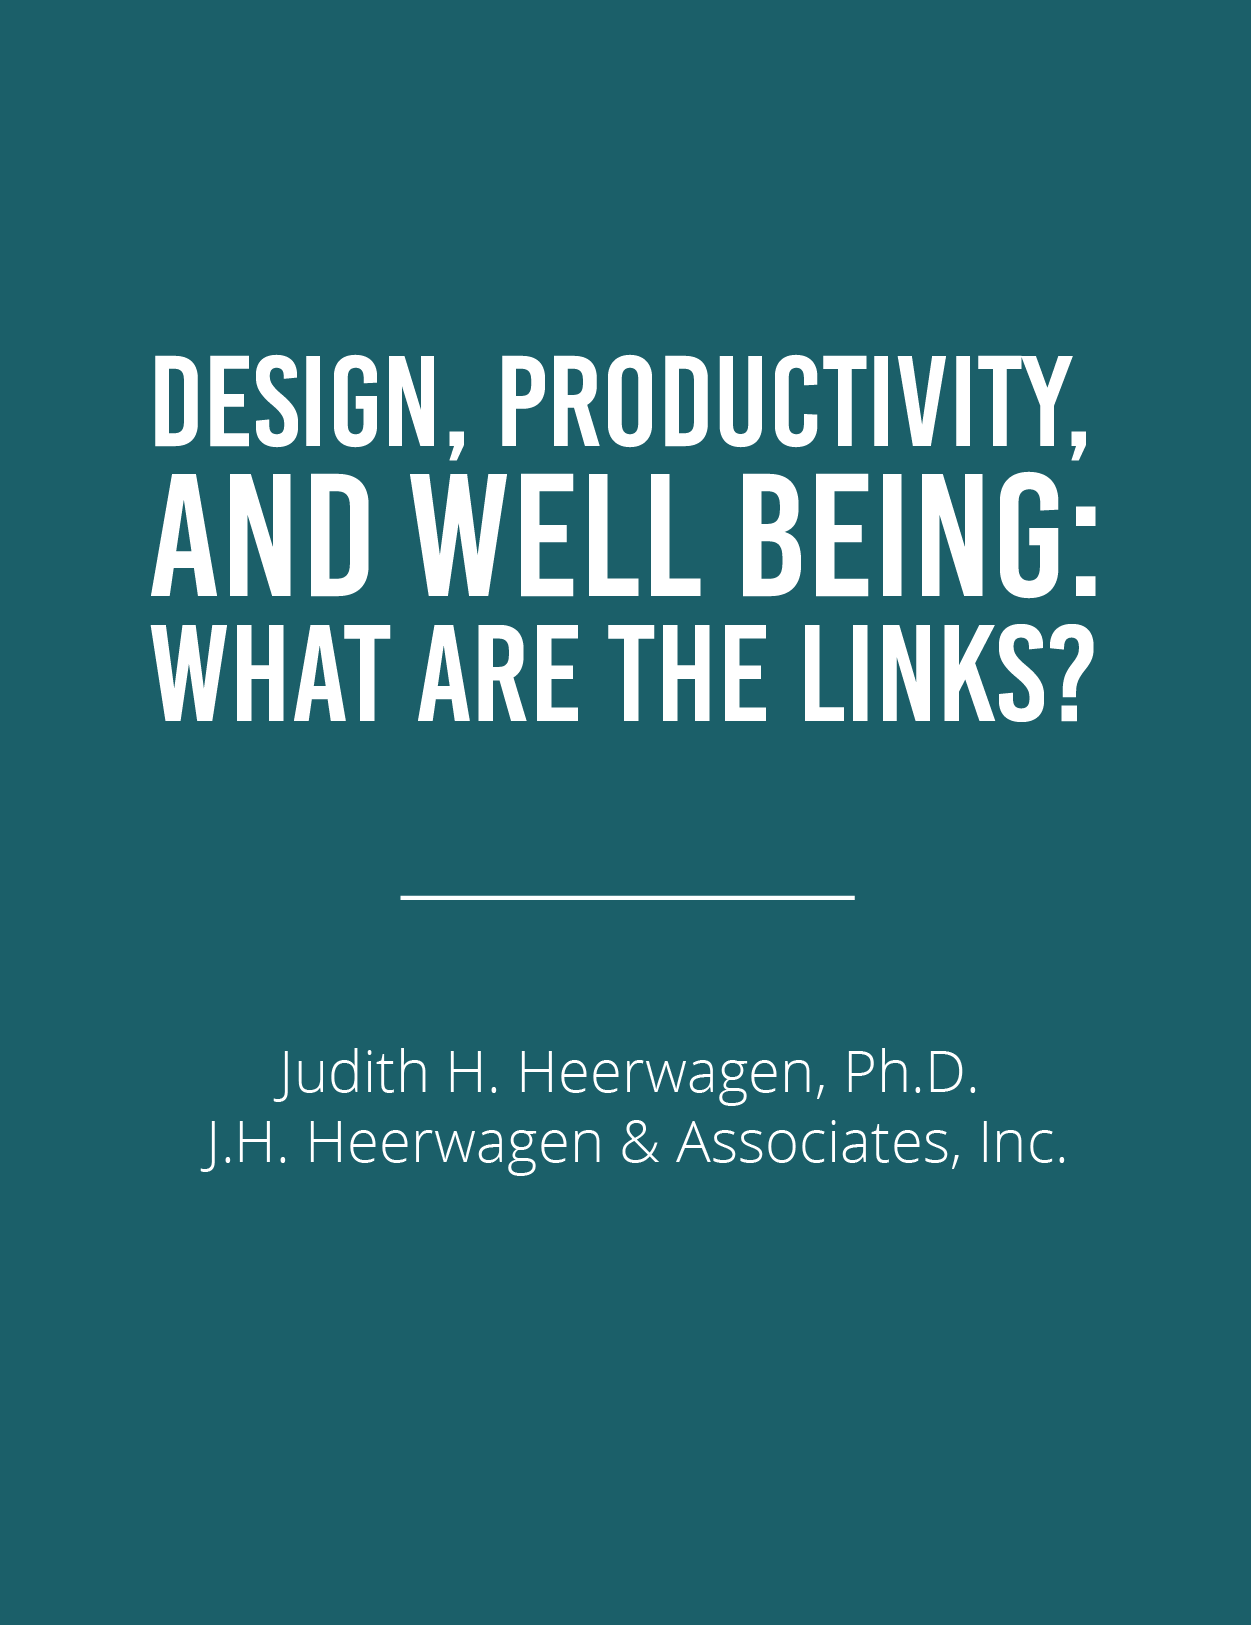 Design, productivity, well being